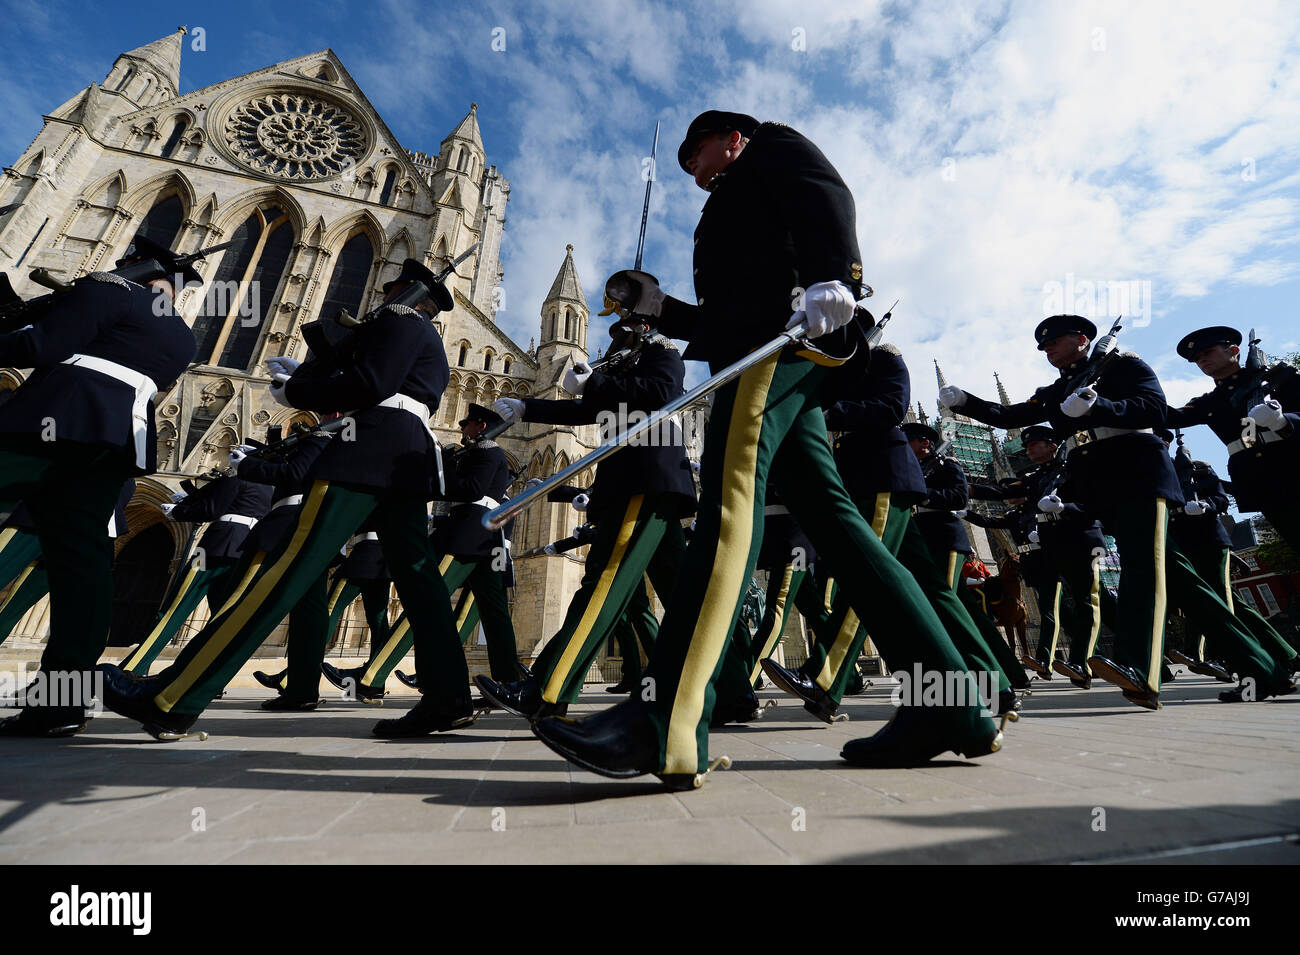 The Royal Dragoons Guard march past York Minster as they parade through the City ahead of a service in the Minster as part of the WWI Commemorations. Stock Photo